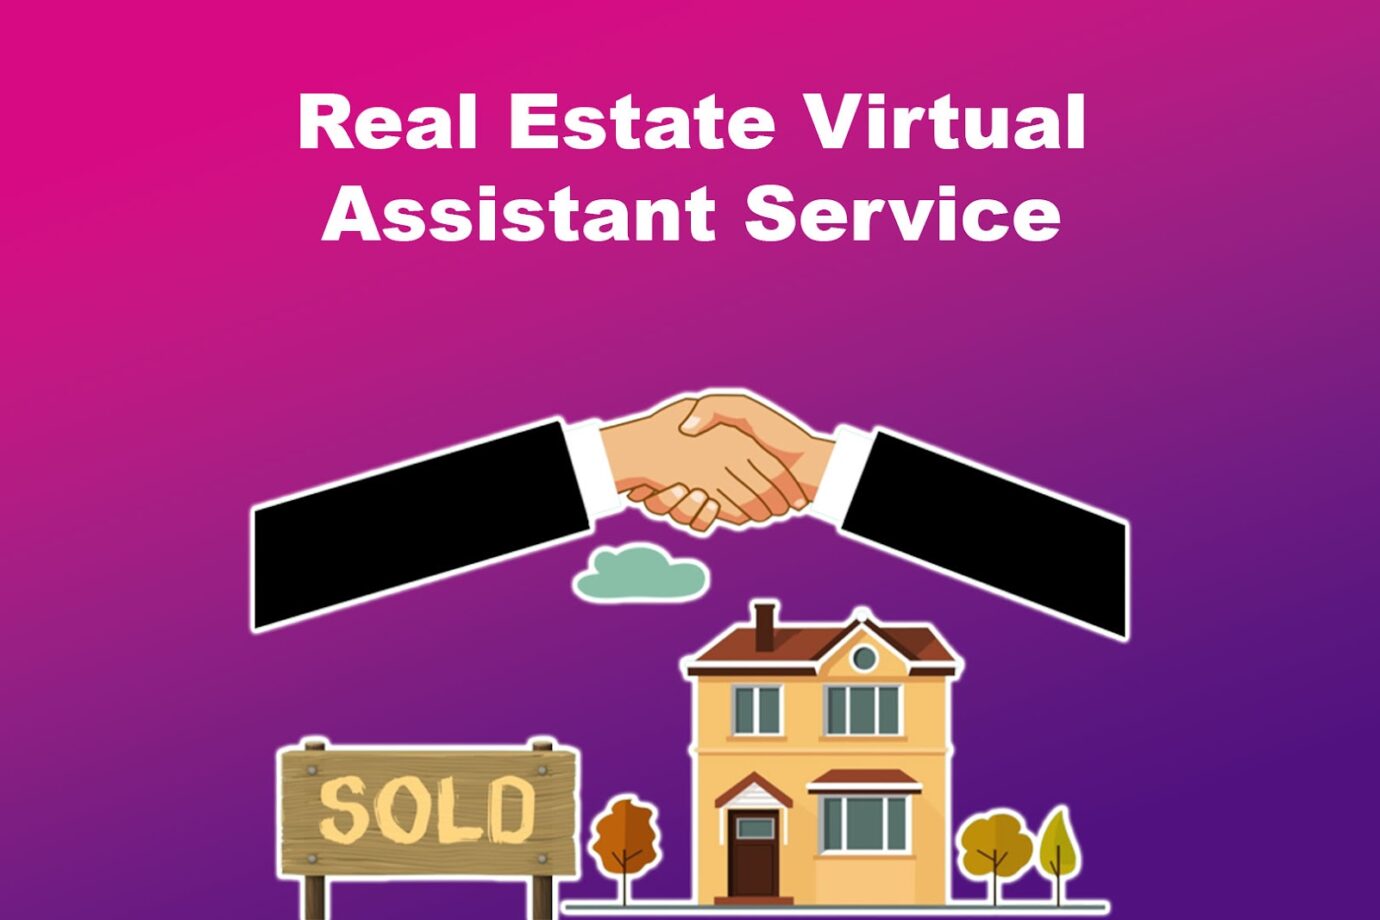 Real Estate Virtual Assistant Service